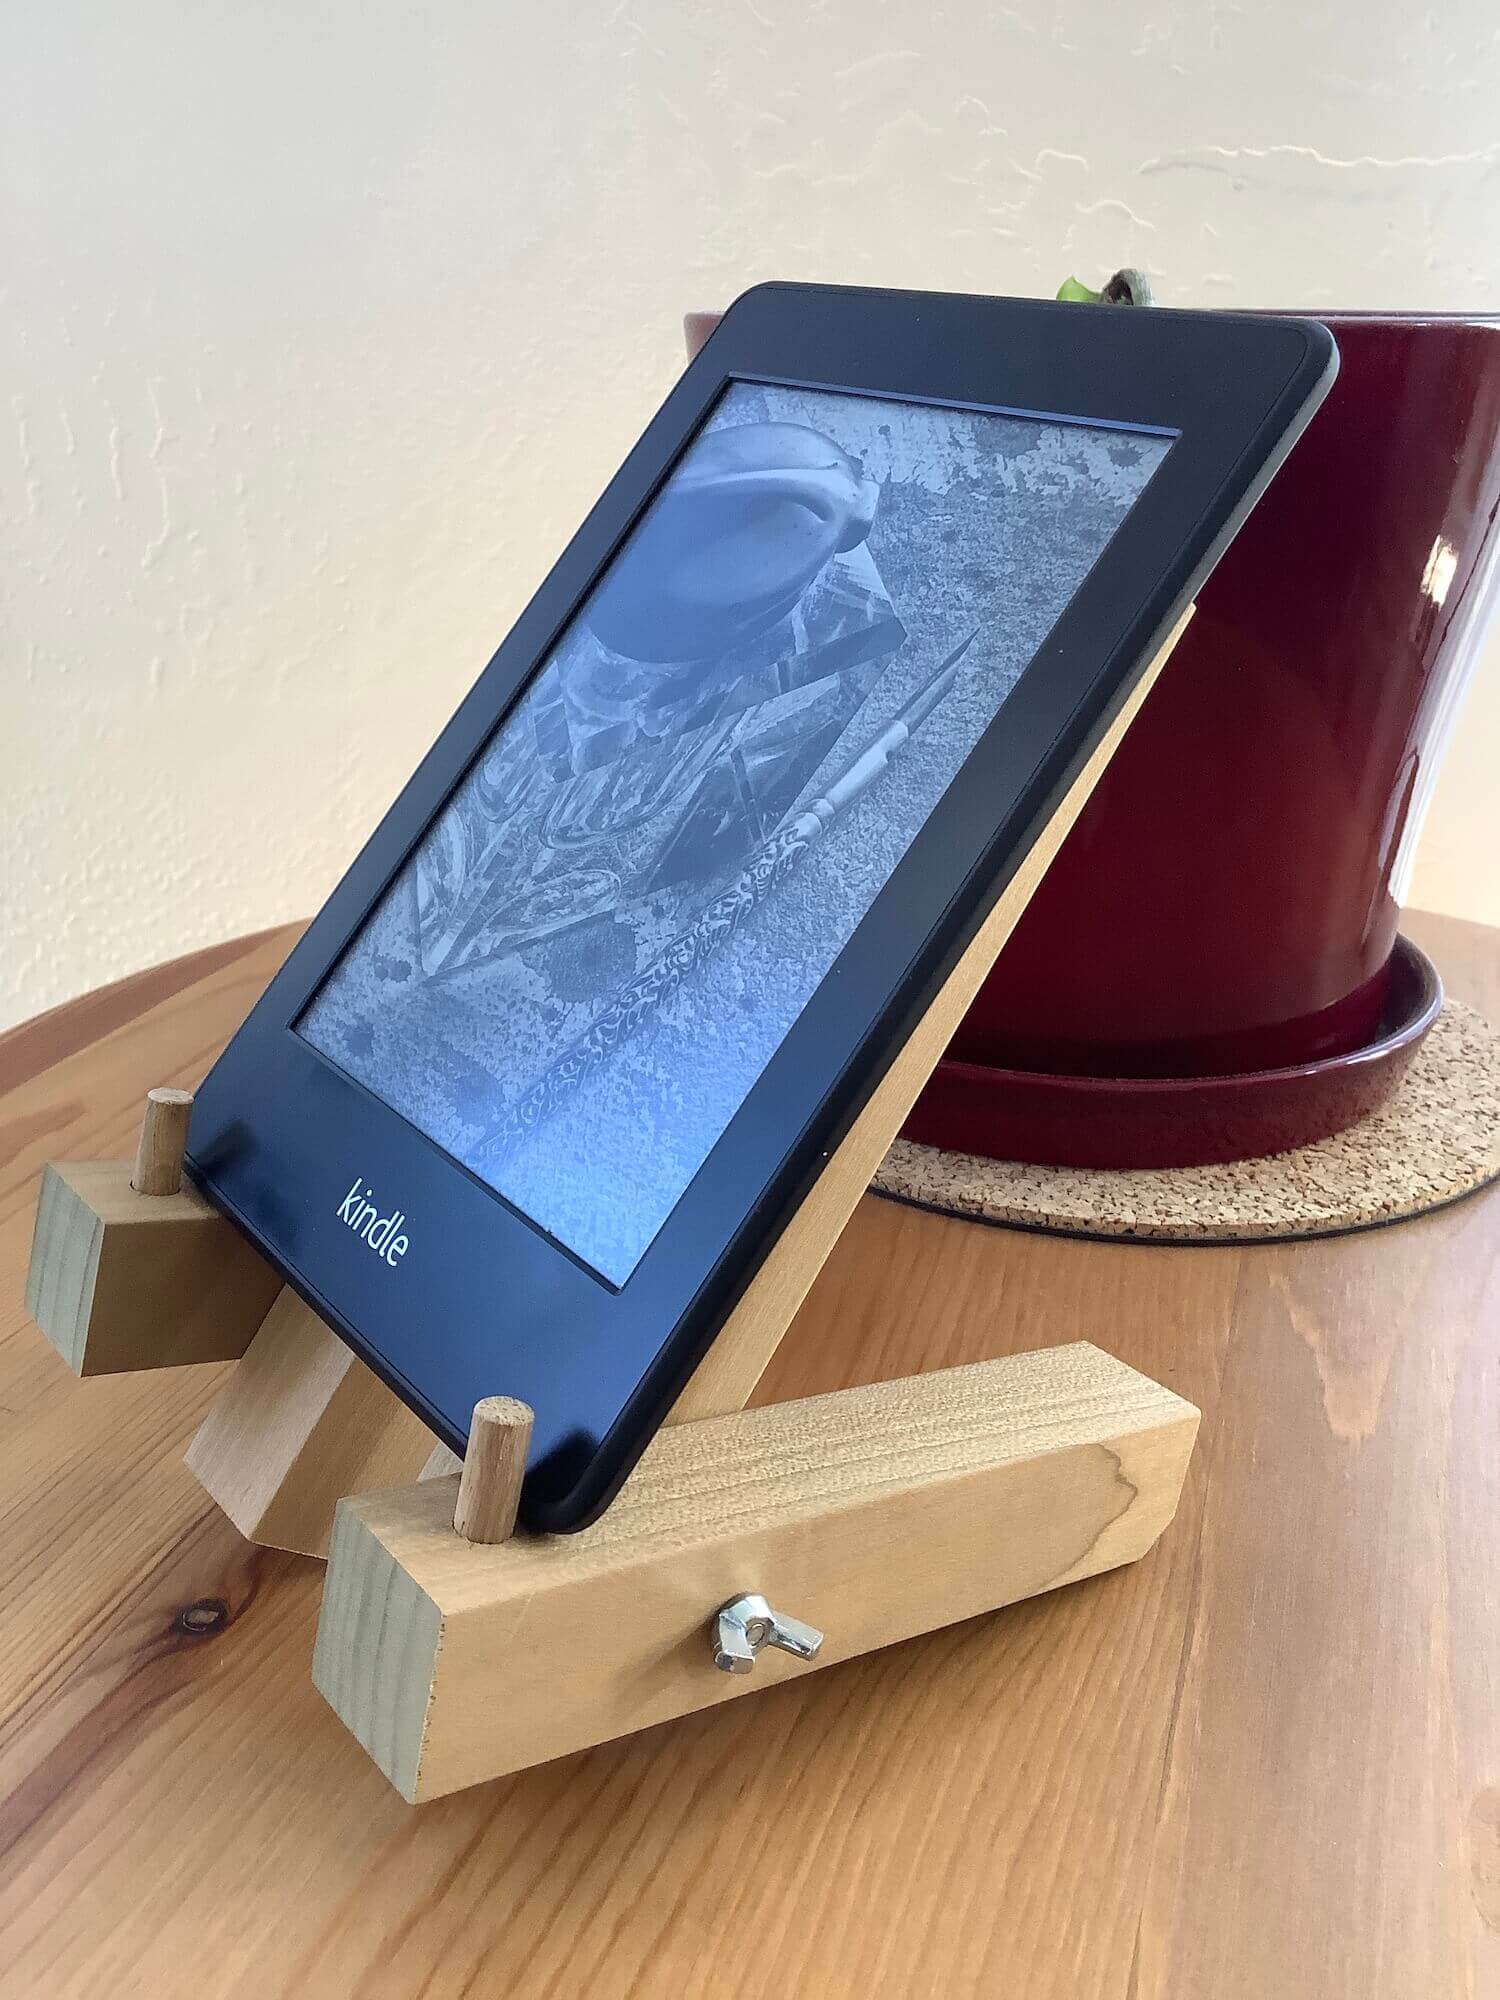 a kindle paperwhite sitting on a custom wood stand with a plant in a red pot in the background